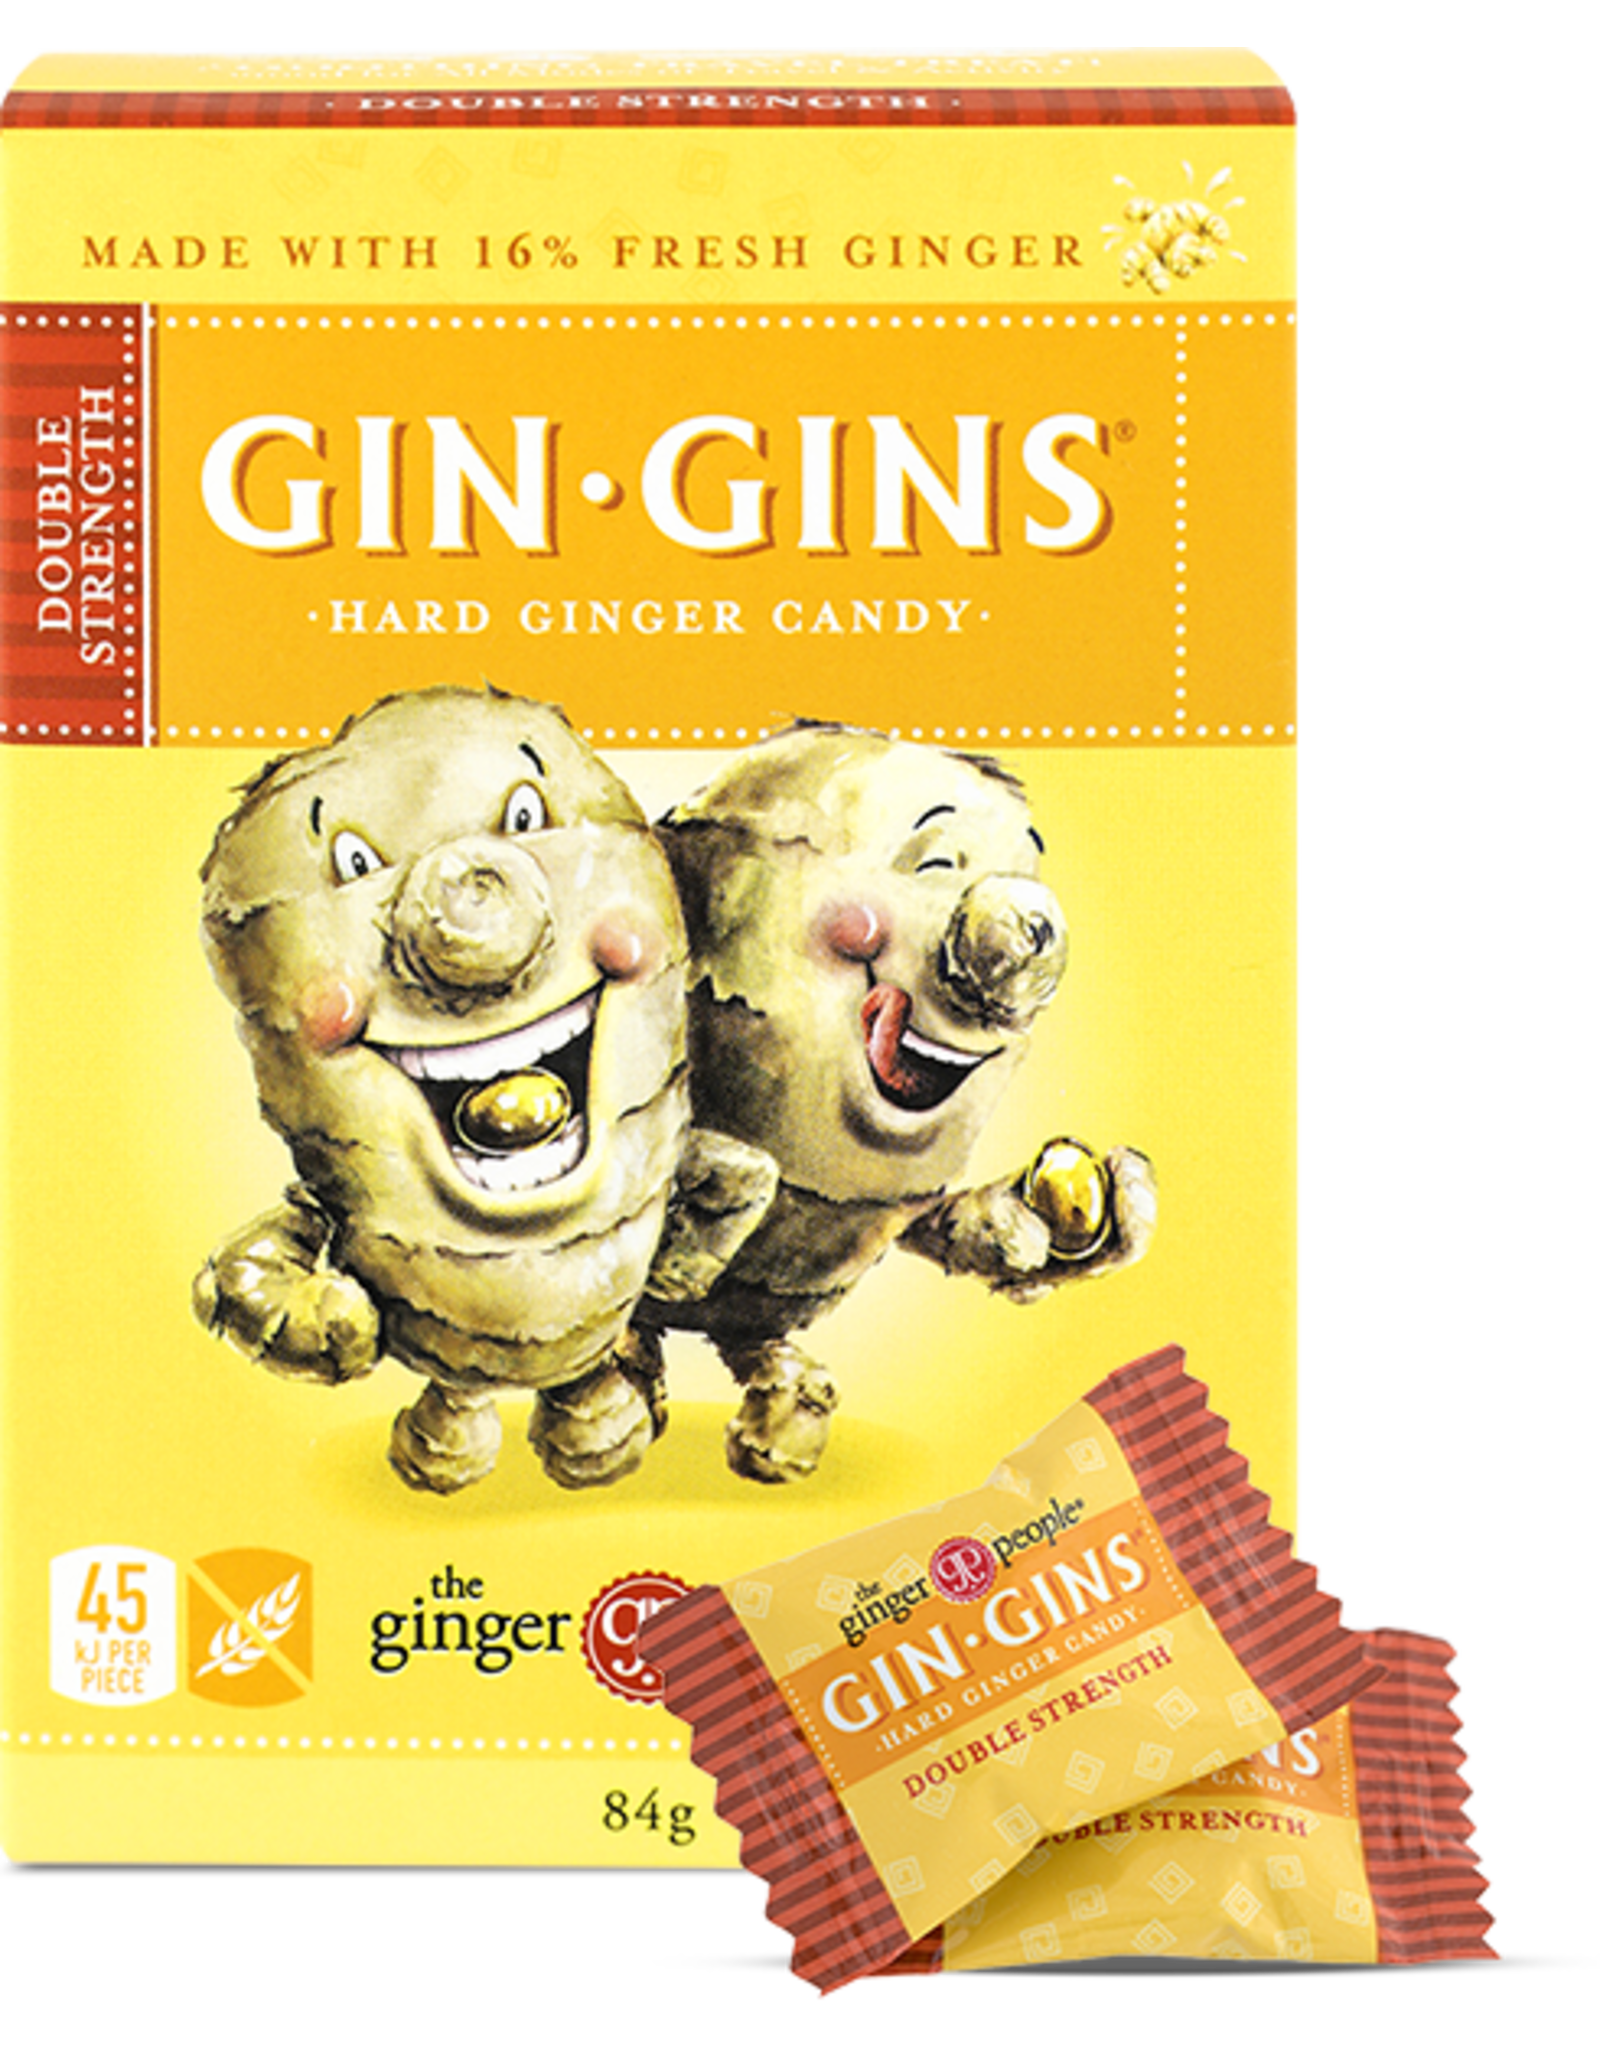 The Ginger People Gin Gins Ginger Candy Hard - Double Strength 84g